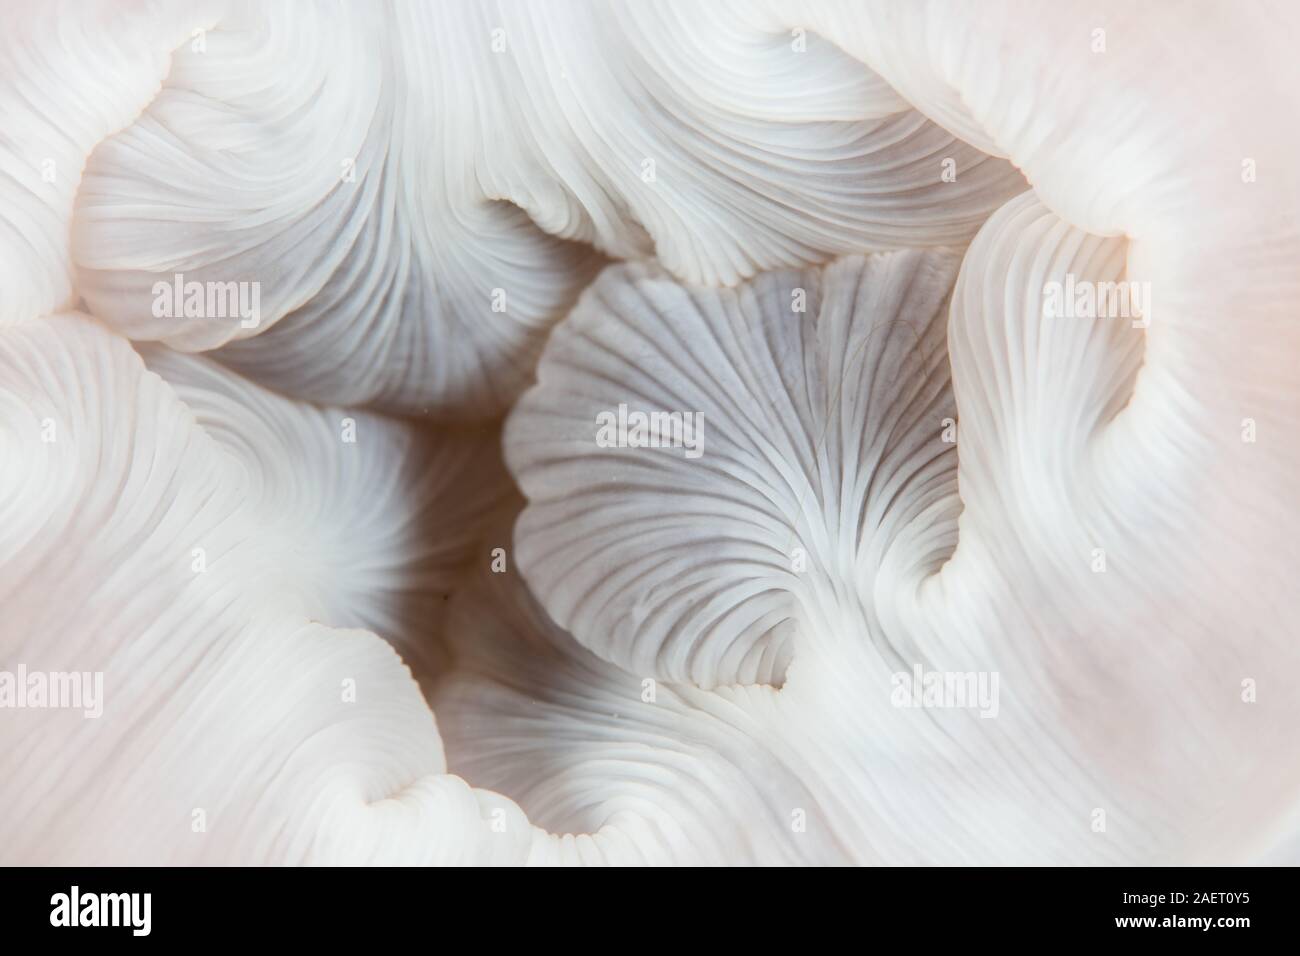 Detail of the mouth of a Magnificent anemone, Heteractis magnifica, growing on a coral reef in Indonesia. Anemones are similar to massive coral polyps. Stock Photo